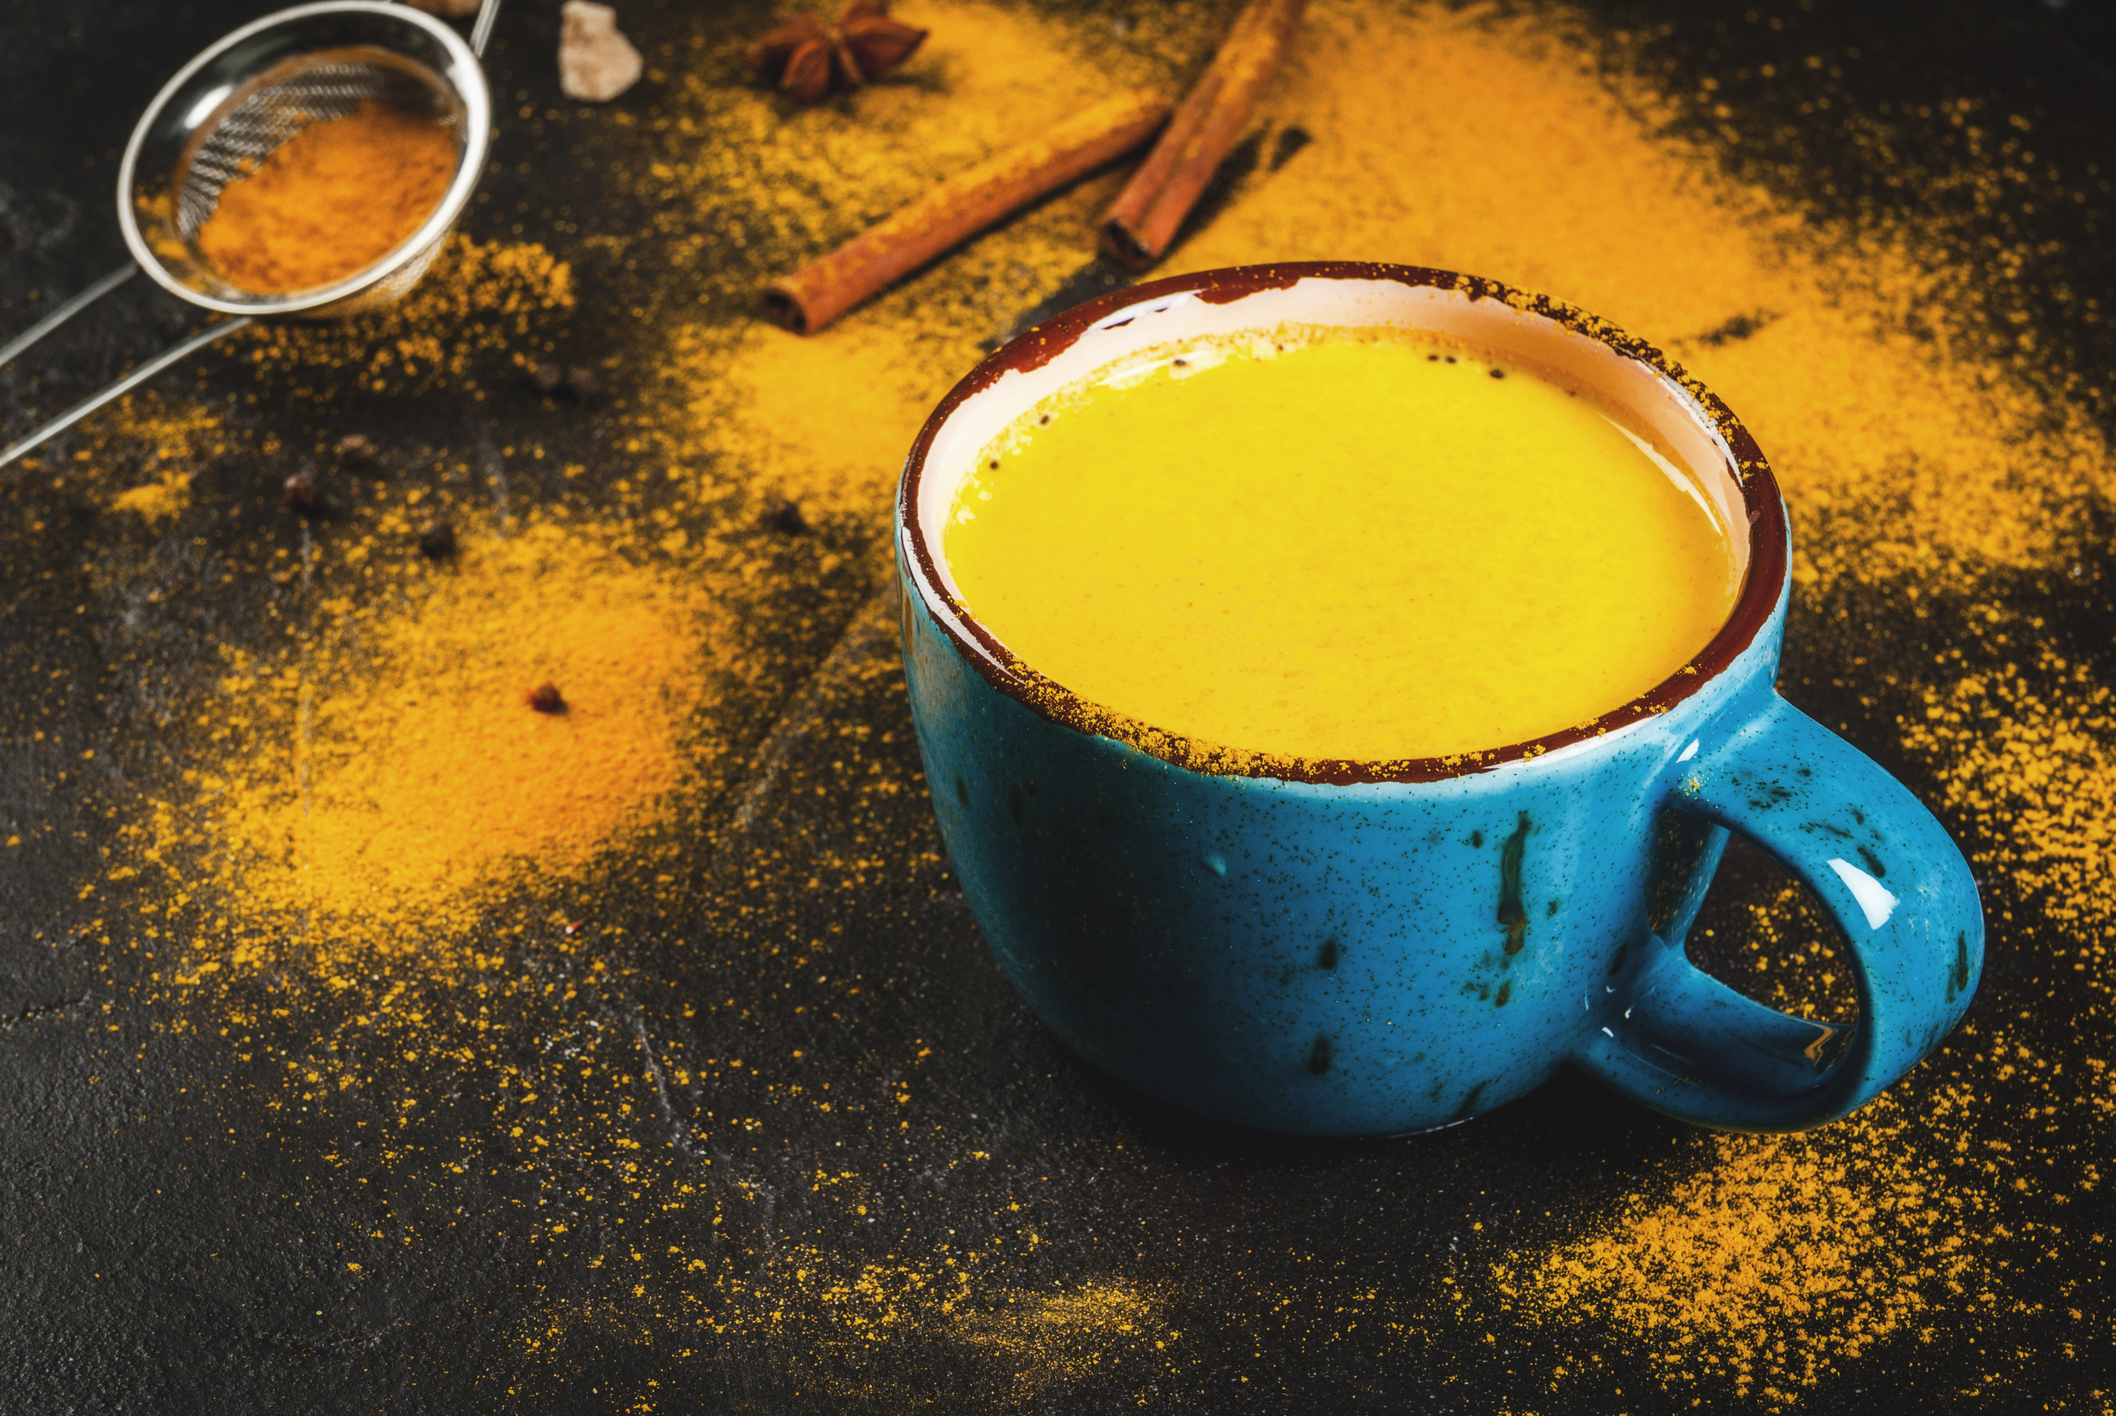 Cinnamon and turmeric’s brain-boosting clout keeps stacking up